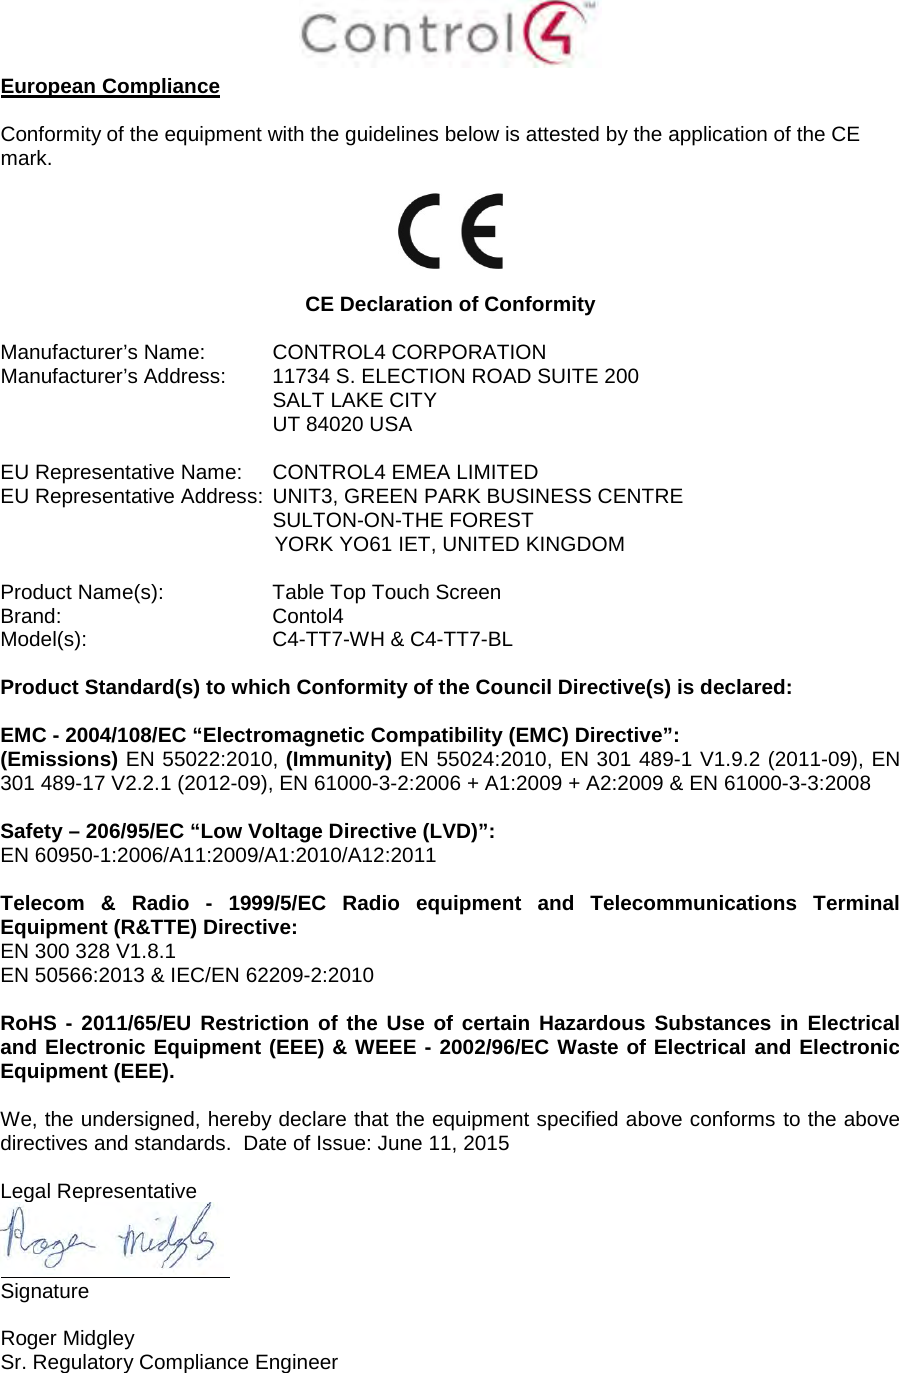 European Compliance Conformity of the equipment with the guidelines below is attested by the application of the CE mark. CE Declaration of Conformity Manufacturer’s Name: CONTROL4 CORPORATION  Manufacturer’s Address:  11734 S. ELECTION ROAD SUITE 200 SALT LAKE CITY  UT 84020 USA  EU Representative Name: CONTROL4 EMEA LIMITED EU Representative Address: UNIT3, GREEN PARK BUSINESS CENTRE SULTON-ON-THE FOREST YORK YO61 IET, UNITED KINGDOM Product Name(s):  Table Top Touch Screen  Brand: Contol4     Model(s): C4-TT7-WH &amp; C4-TT7-BL Product Standard(s) to which Conformity of the Council Directive(s) is declared: EMC - 2004/108/EC “Electromagnetic Compatibility (EMC) Directive”: (Emissions) EN 55022:2010, (Immunity) EN 55024:2010, EN 301 489-1 V1.9.2 (2011-09), EN 301 489-17 V2.2.1 (2012-09), EN 61000-3-2:2006 + A1:2009 + A2:2009 &amp; EN 61000-3-3:2008 Safety – 206/95/EC “Low Voltage Directive (LVD)”: EN 60950-1:2006/A11:2009/A1:2010/A12:2011  Telecom &amp; Radio -  1999/5/EC Radio equipment and Telecommunications Terminal Equipment (R&amp;TTE) Directive: EN 300 328 V1.8.1 EN 50566:2013 &amp; IEC/EN 62209-2:2010 RoHS - 2011/65/EU Restriction of the Use of certain Hazardous Substances in Electrical and Electronic Equipment (EEE) &amp; WEEE - 2002/96/EC Waste of Electrical and Electronic Equipment (EEE). We, the undersigned, hereby declare that the equipment specified above conforms to the above directives and standards.  Date of Issue: June 11, 2015 Legal Representative Signature Roger Midgley  Sr. Regulatory Compliance Engineer 